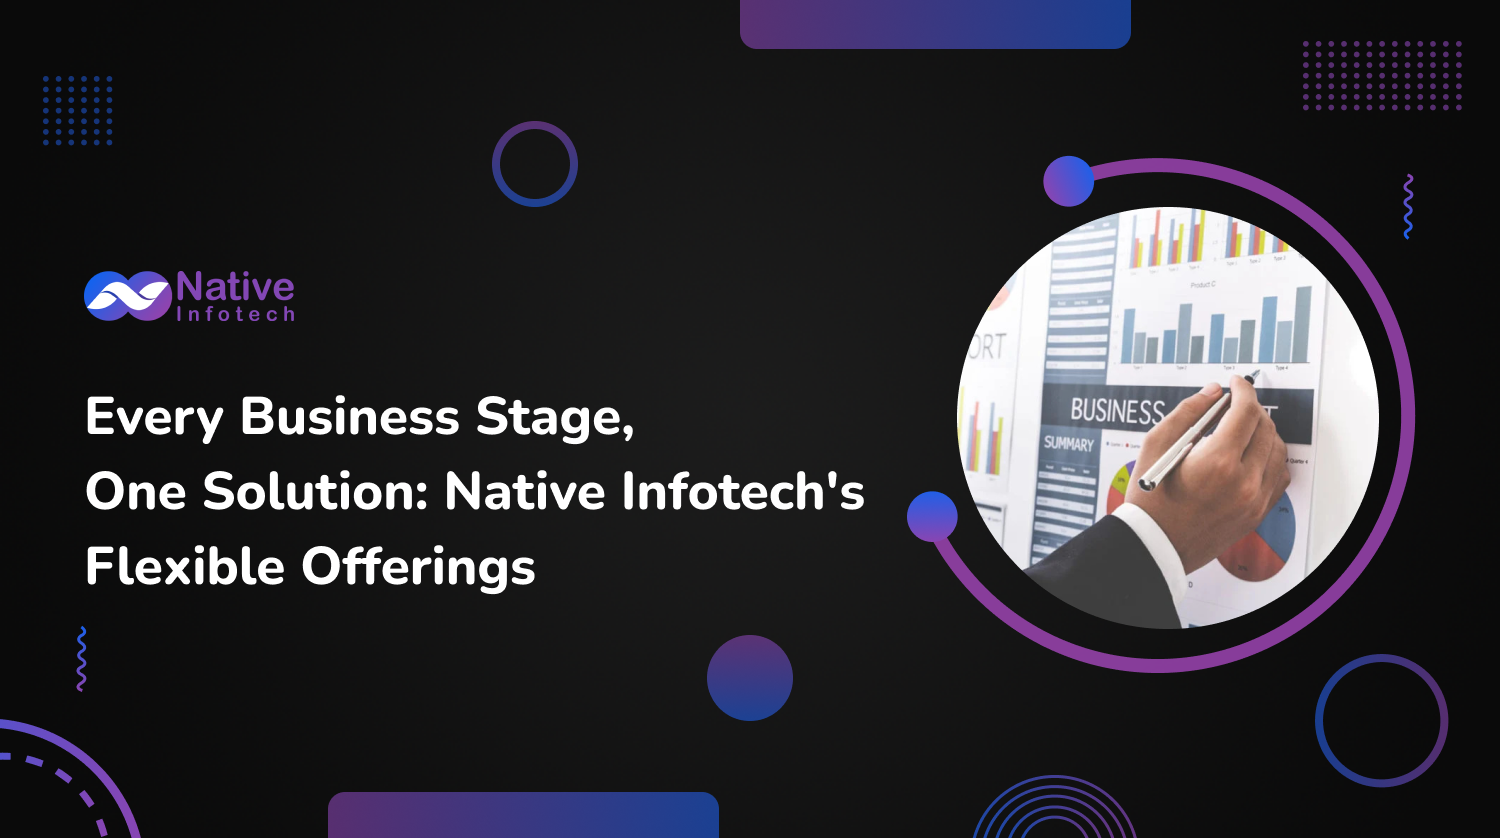 Every Business Stage, One Solution: Native Infotech’s Flexible Offerings | Native Infotech